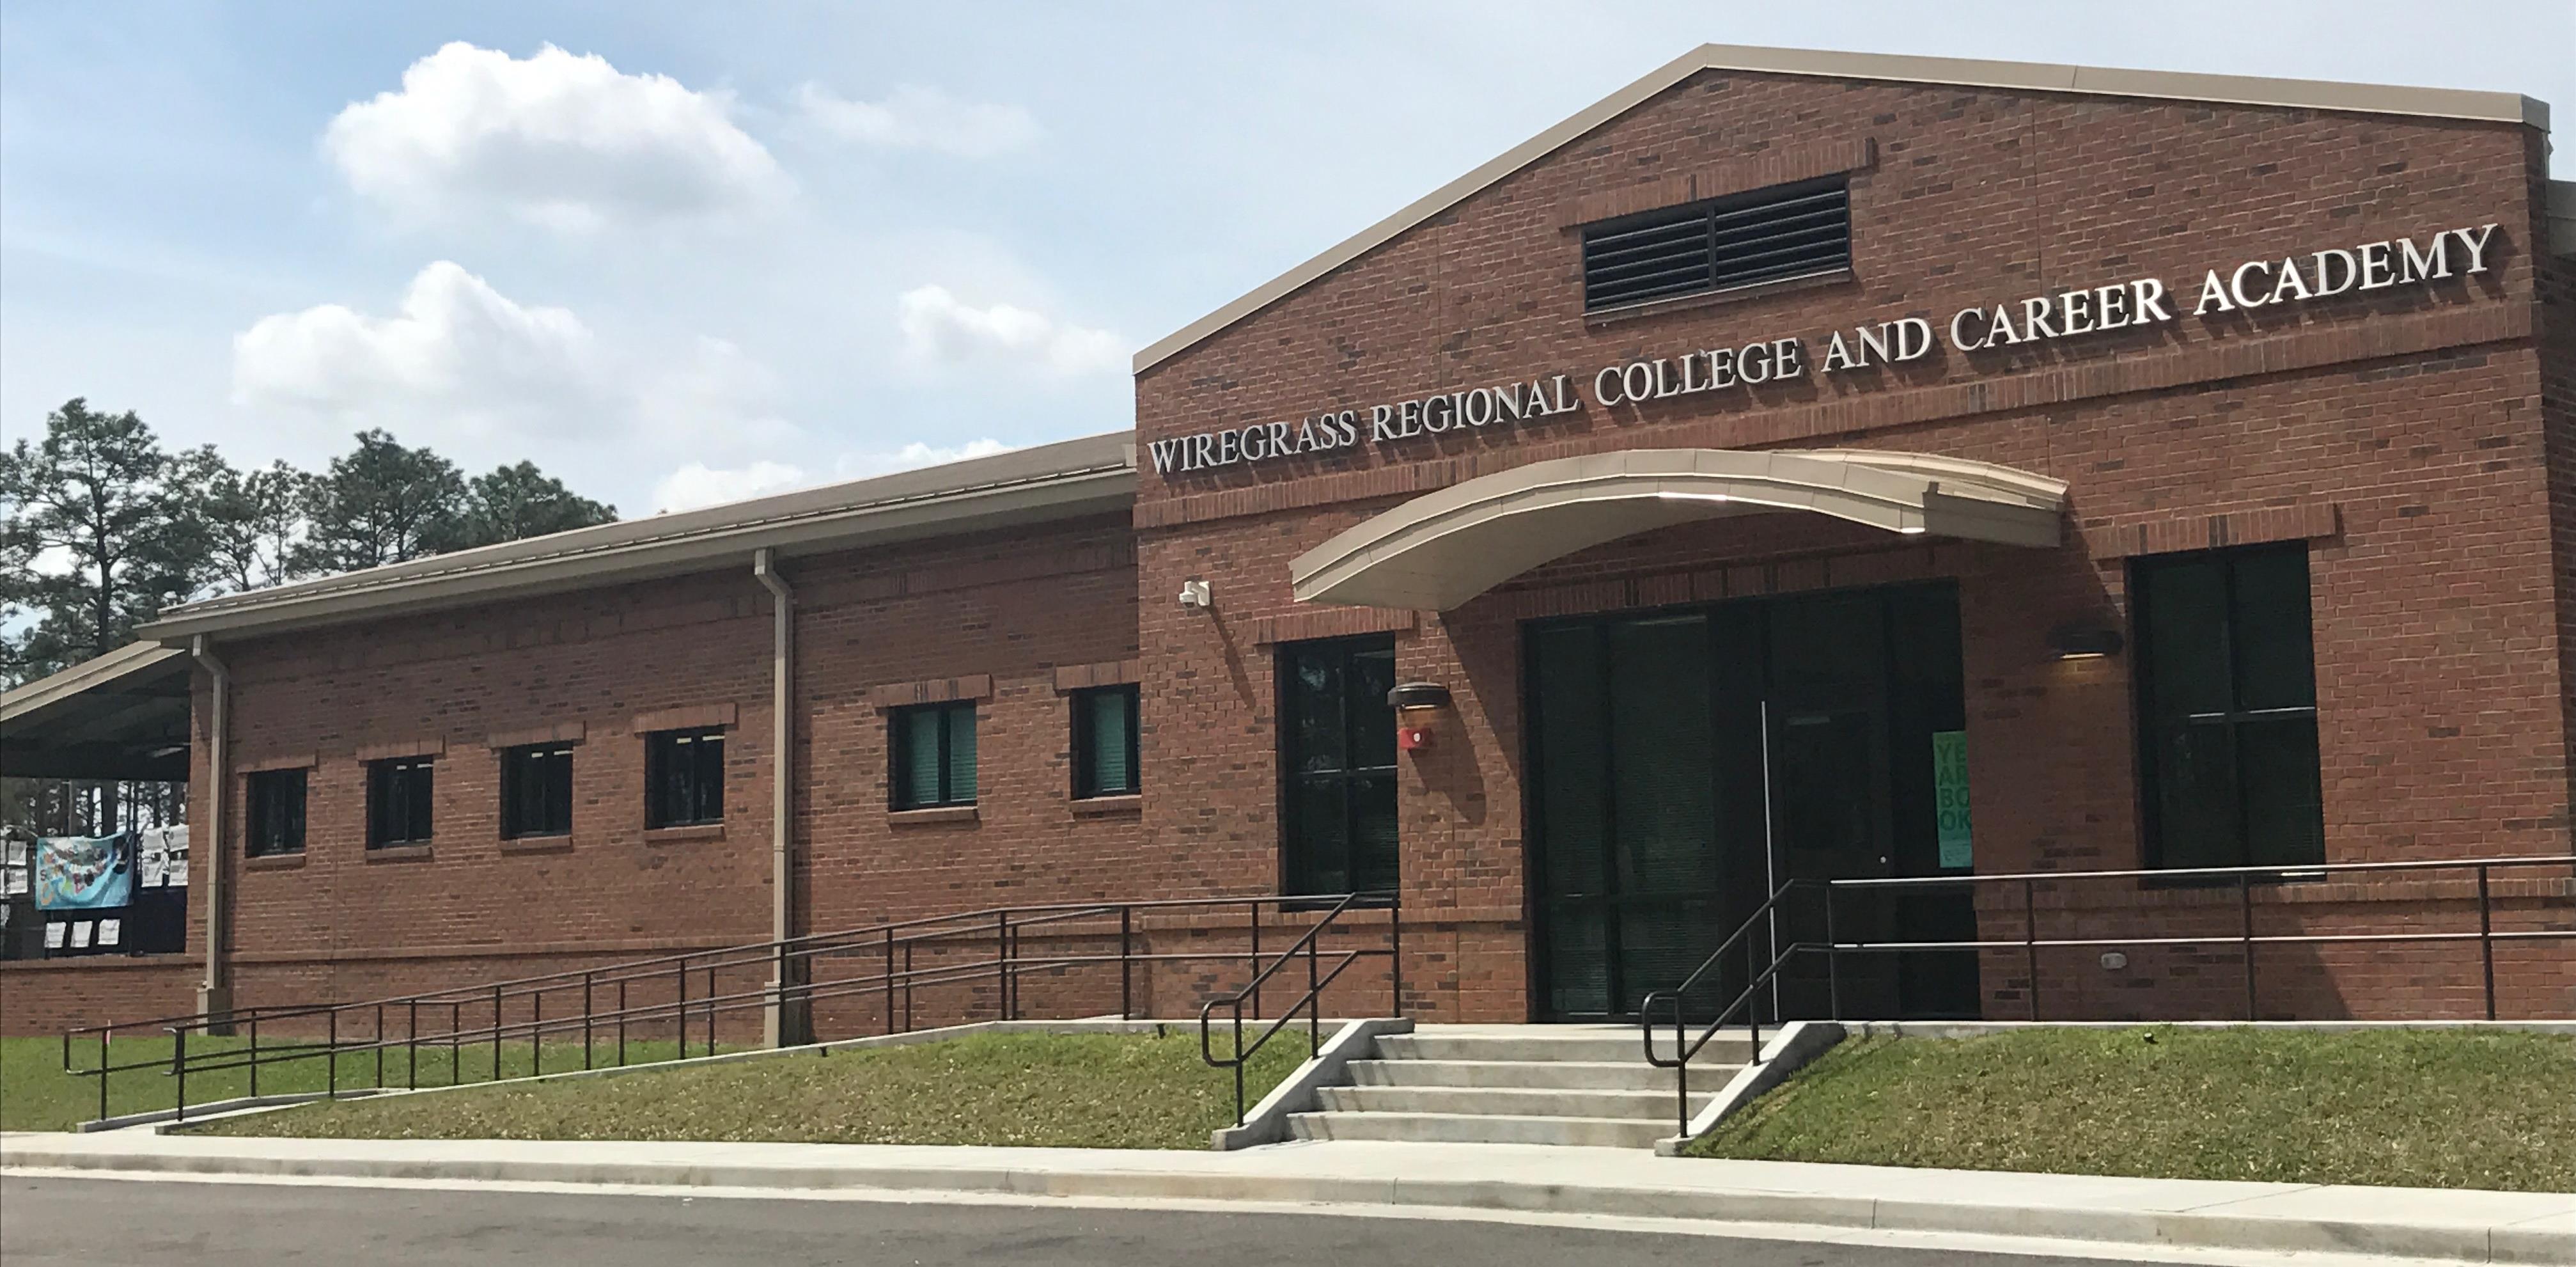 Wiregrass Regional College and Career Academy